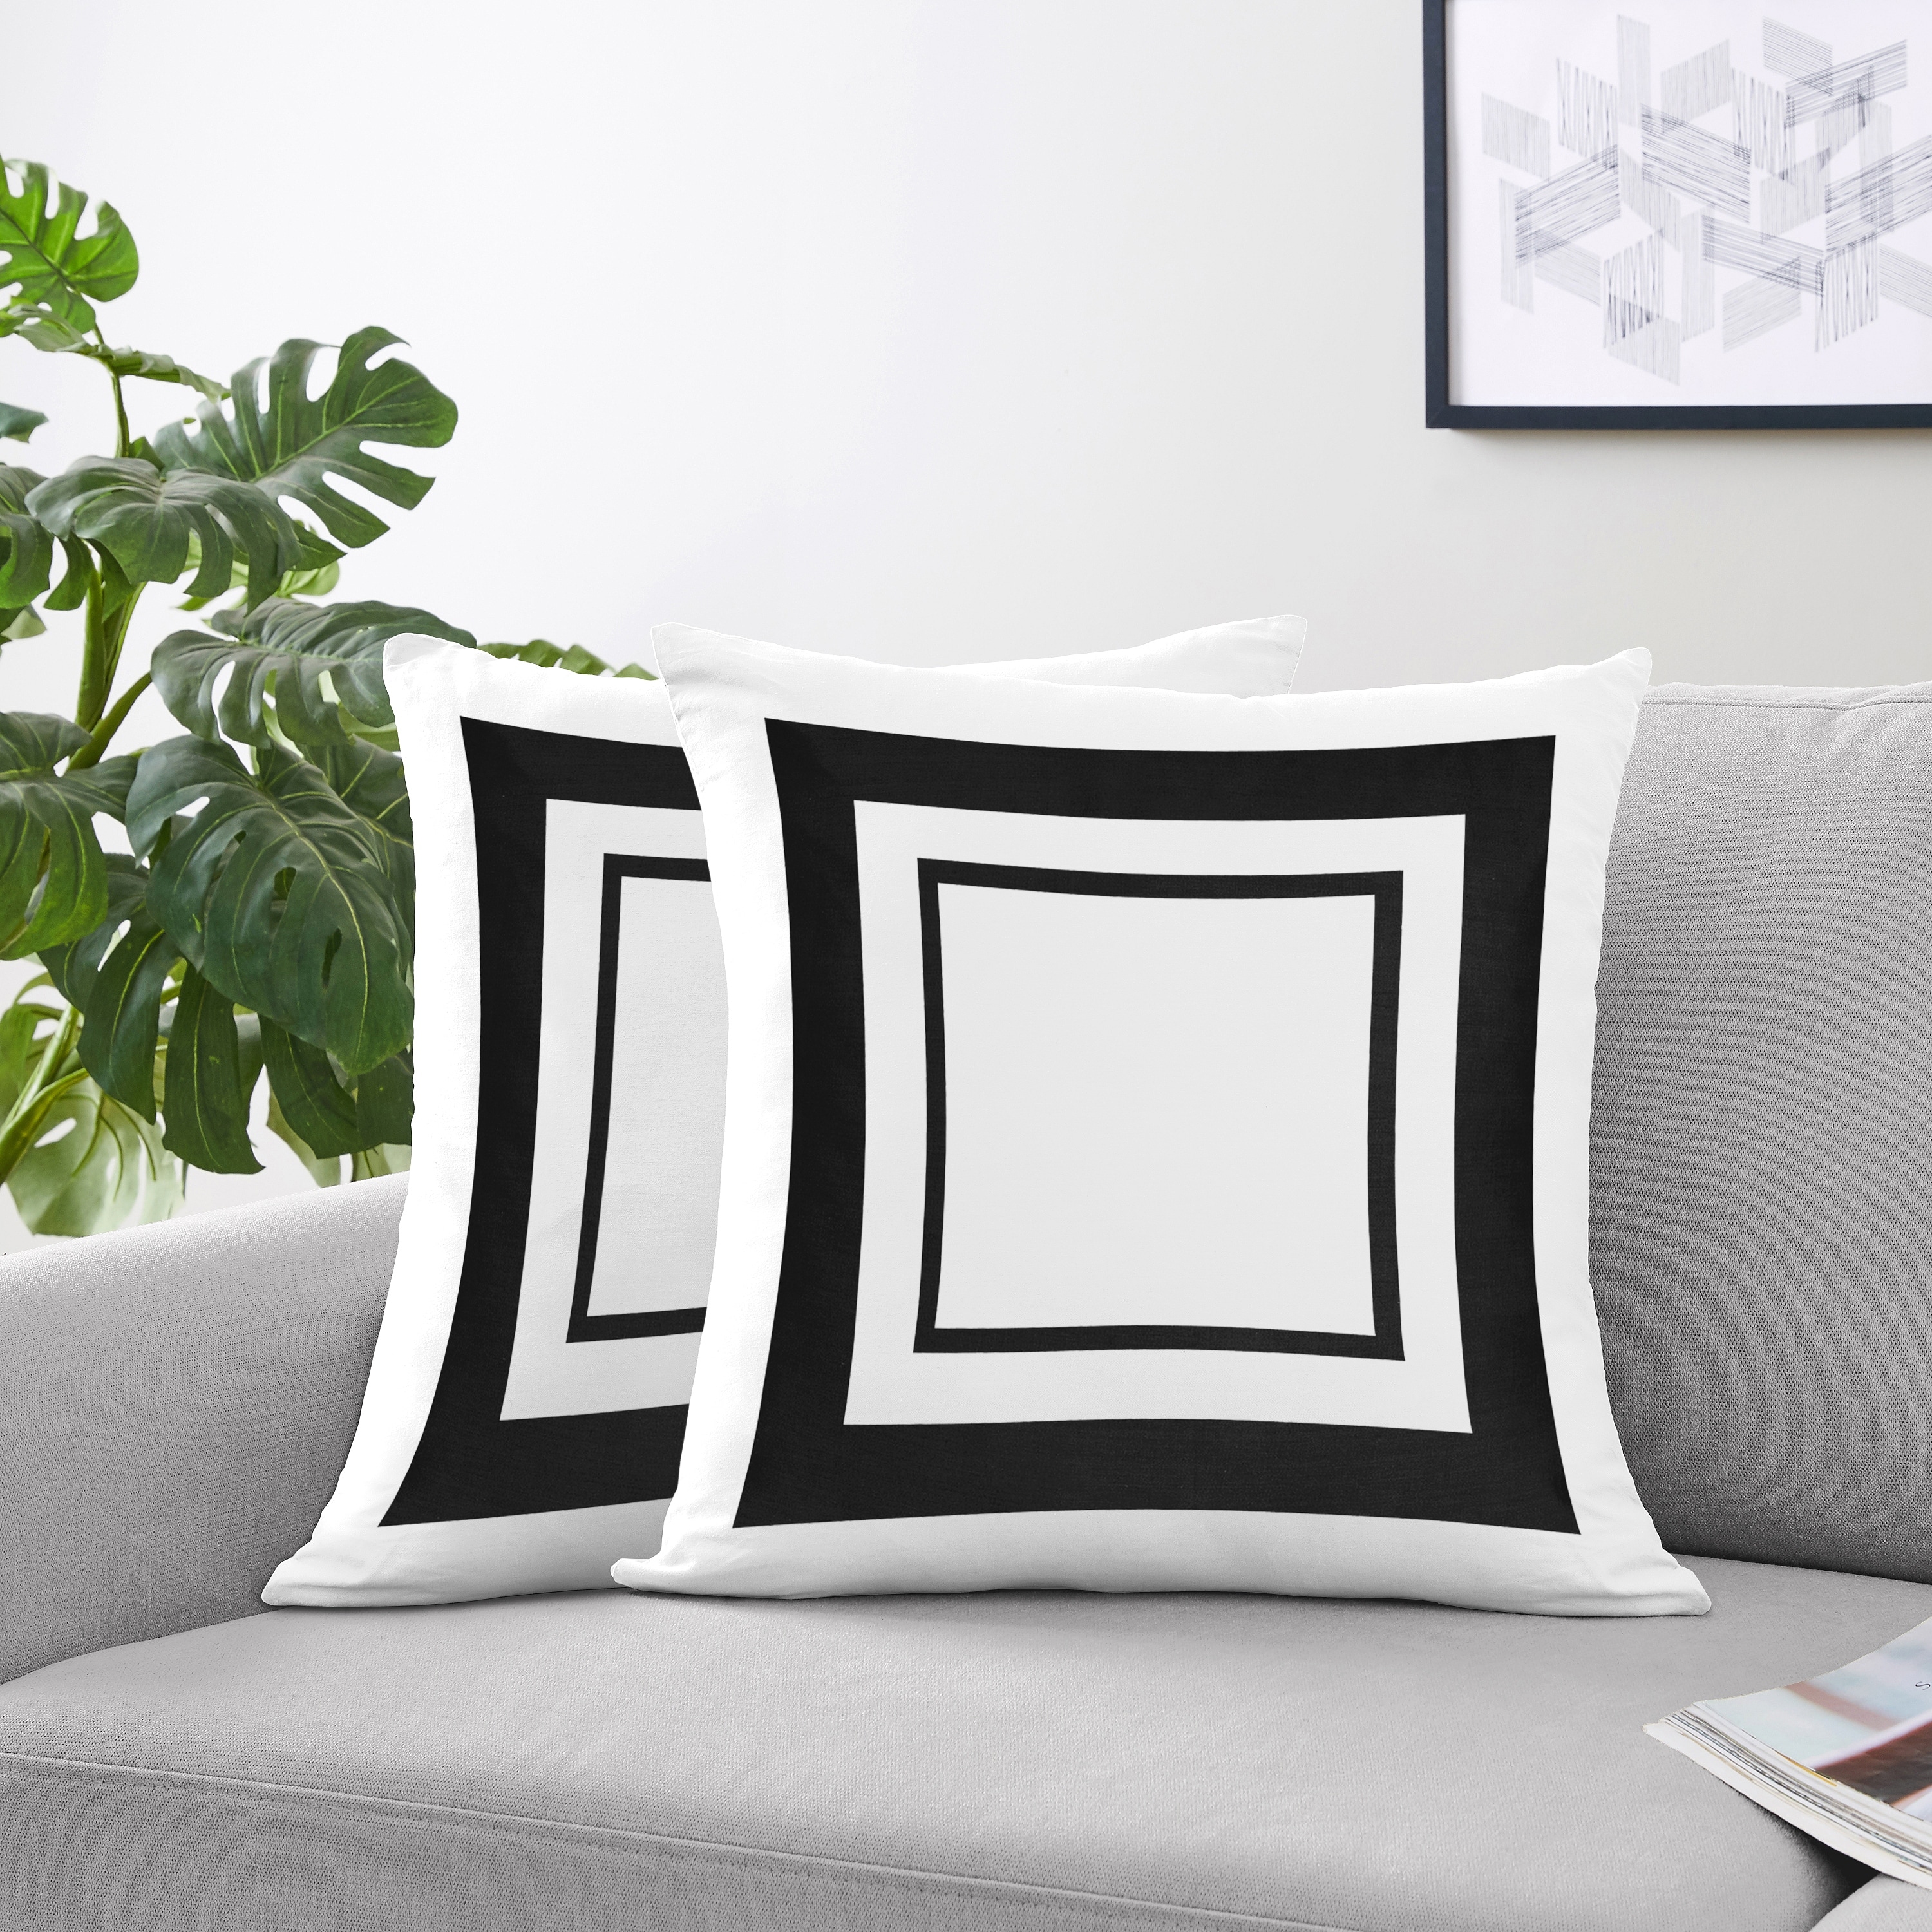 https://ak1.ostkcdn.com/images/products/is/images/direct/0707e3fc915ced43915a508b986dd178b6c951bb/Sweet-Jojo-Designs-White-and-Black-Hotel-Decorative-Accent-Throw-Pillow-%28Set-of-2%29.jpg